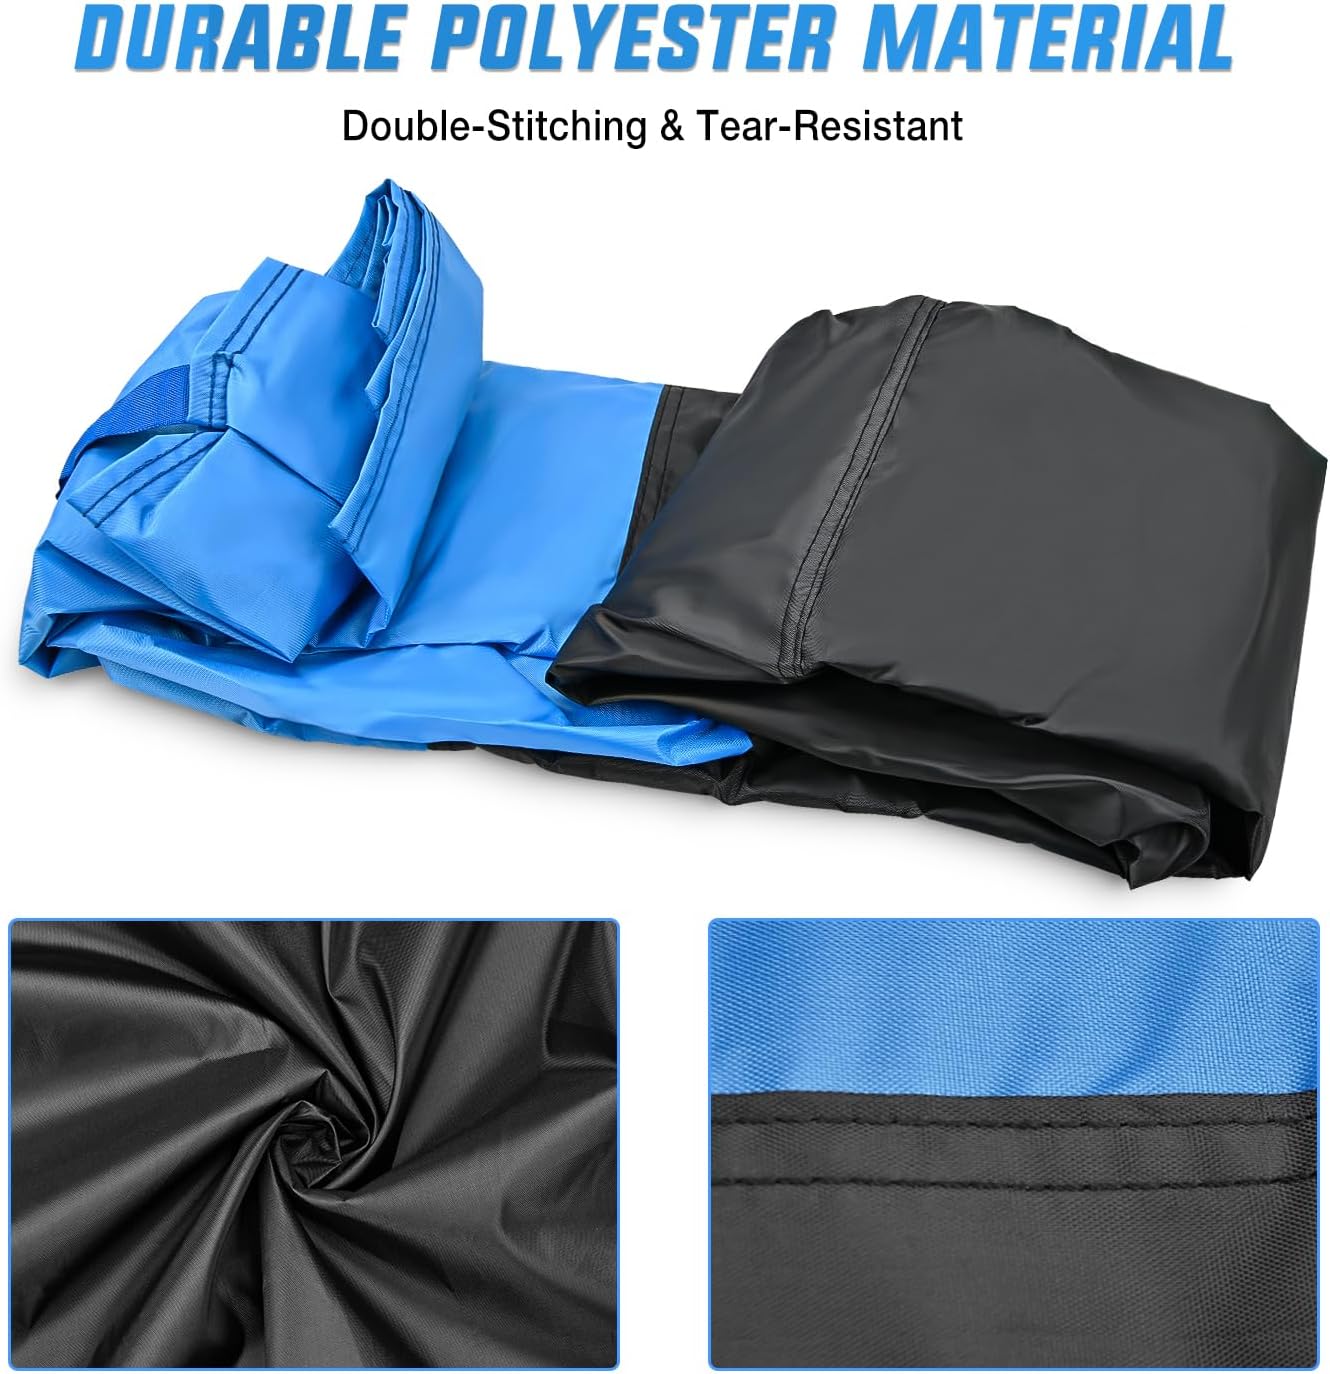 Motorcycle Cover with Lock-Hole Storage Bag & Protective Reflective Strip Fits up to 96" Nilight